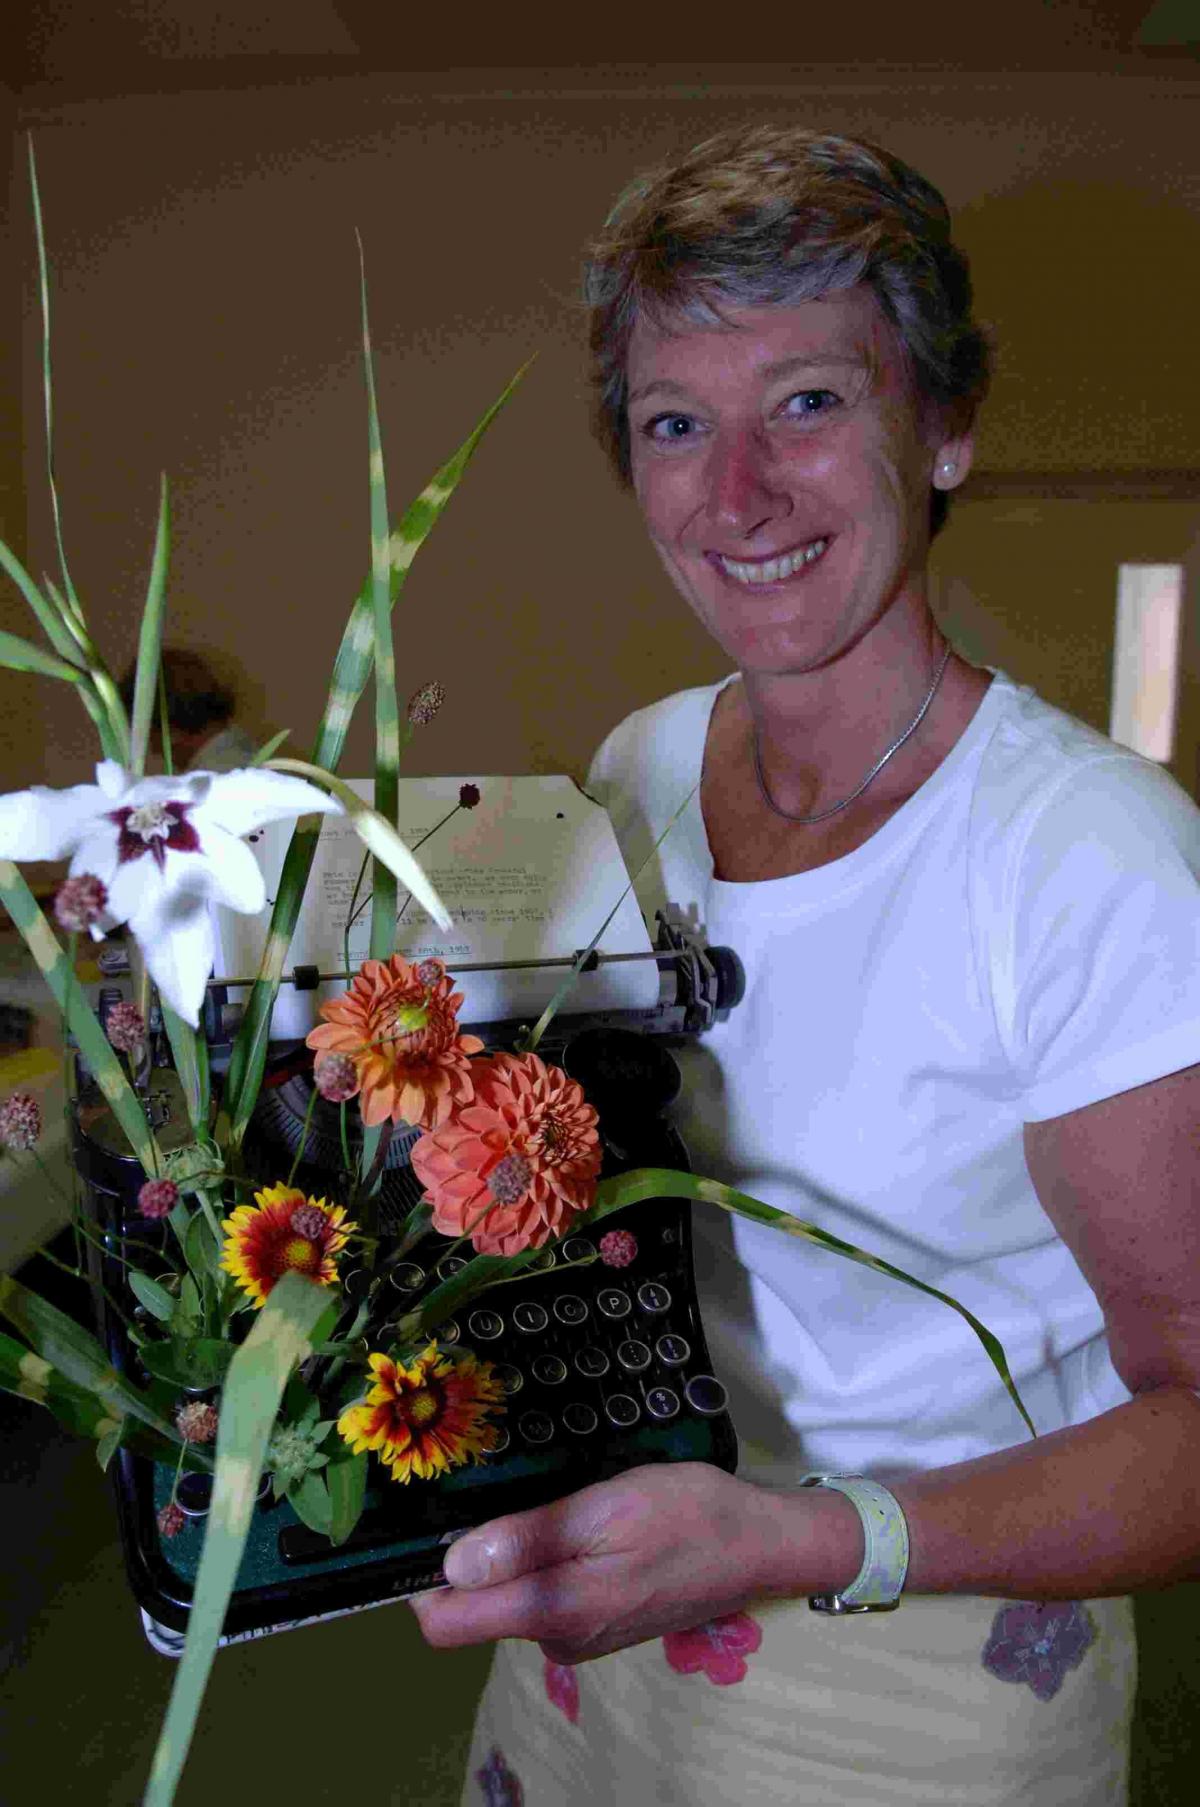 An imaginative entry in the Flowers Show at Appleshaw in 2007.